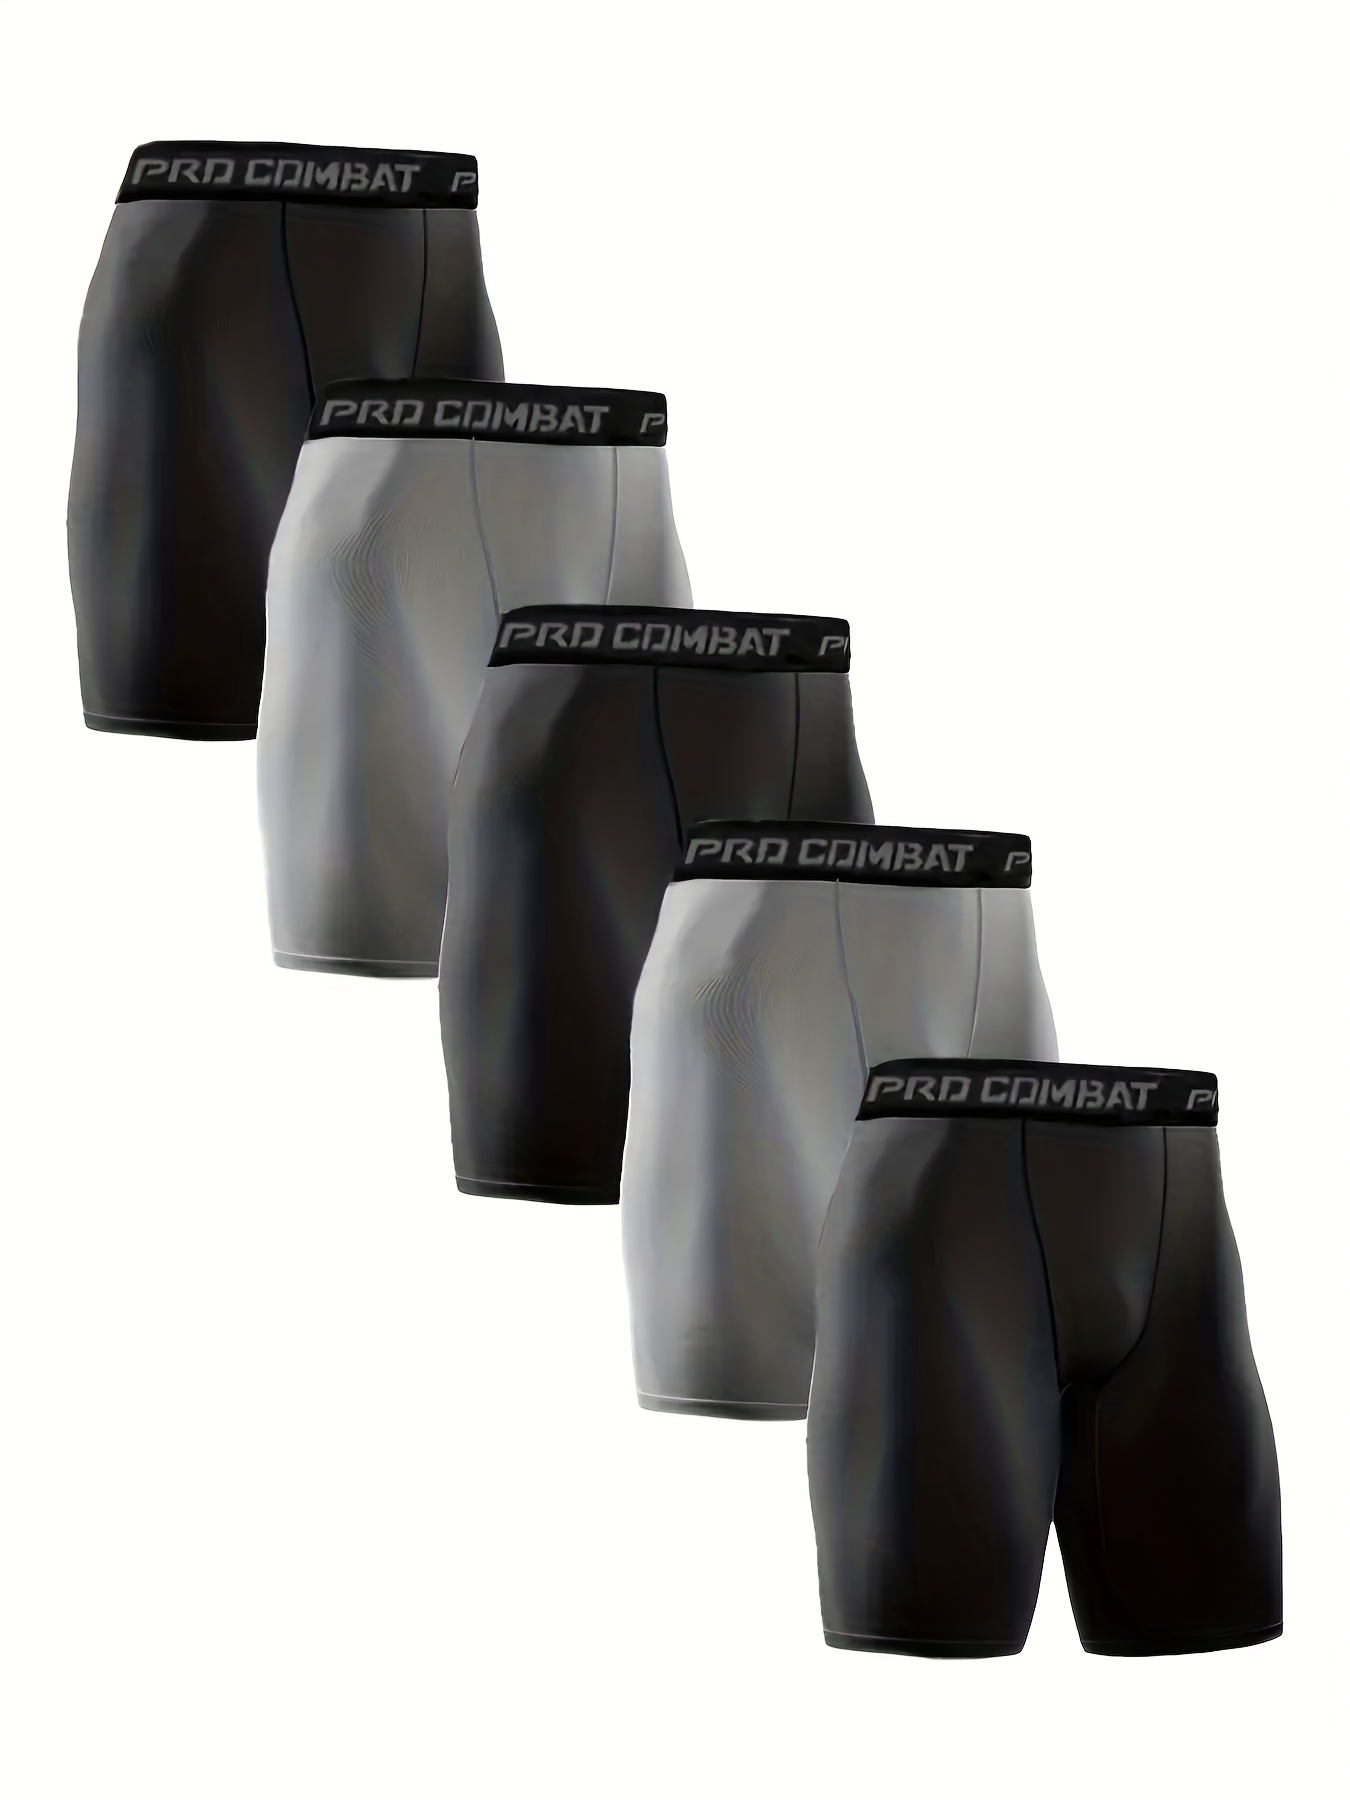 AND1 Men's Underwear - 10 Pack Long Leg Performance Compression